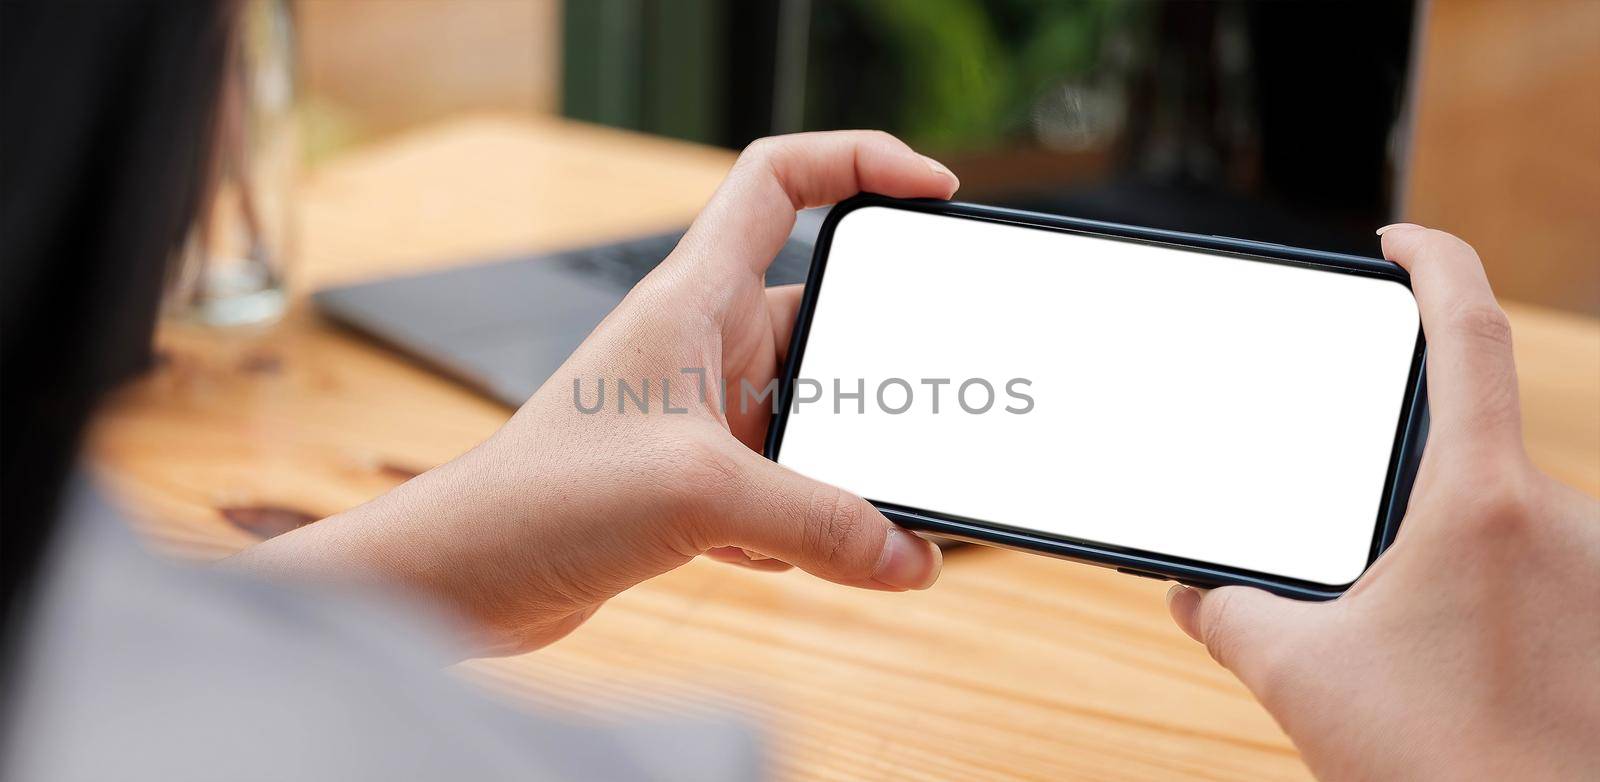 Mockup image woman hand holding texting using black mobile,cell phone with copy space,white blank screen for text.concept for contact business,people communication,technology electronic device.